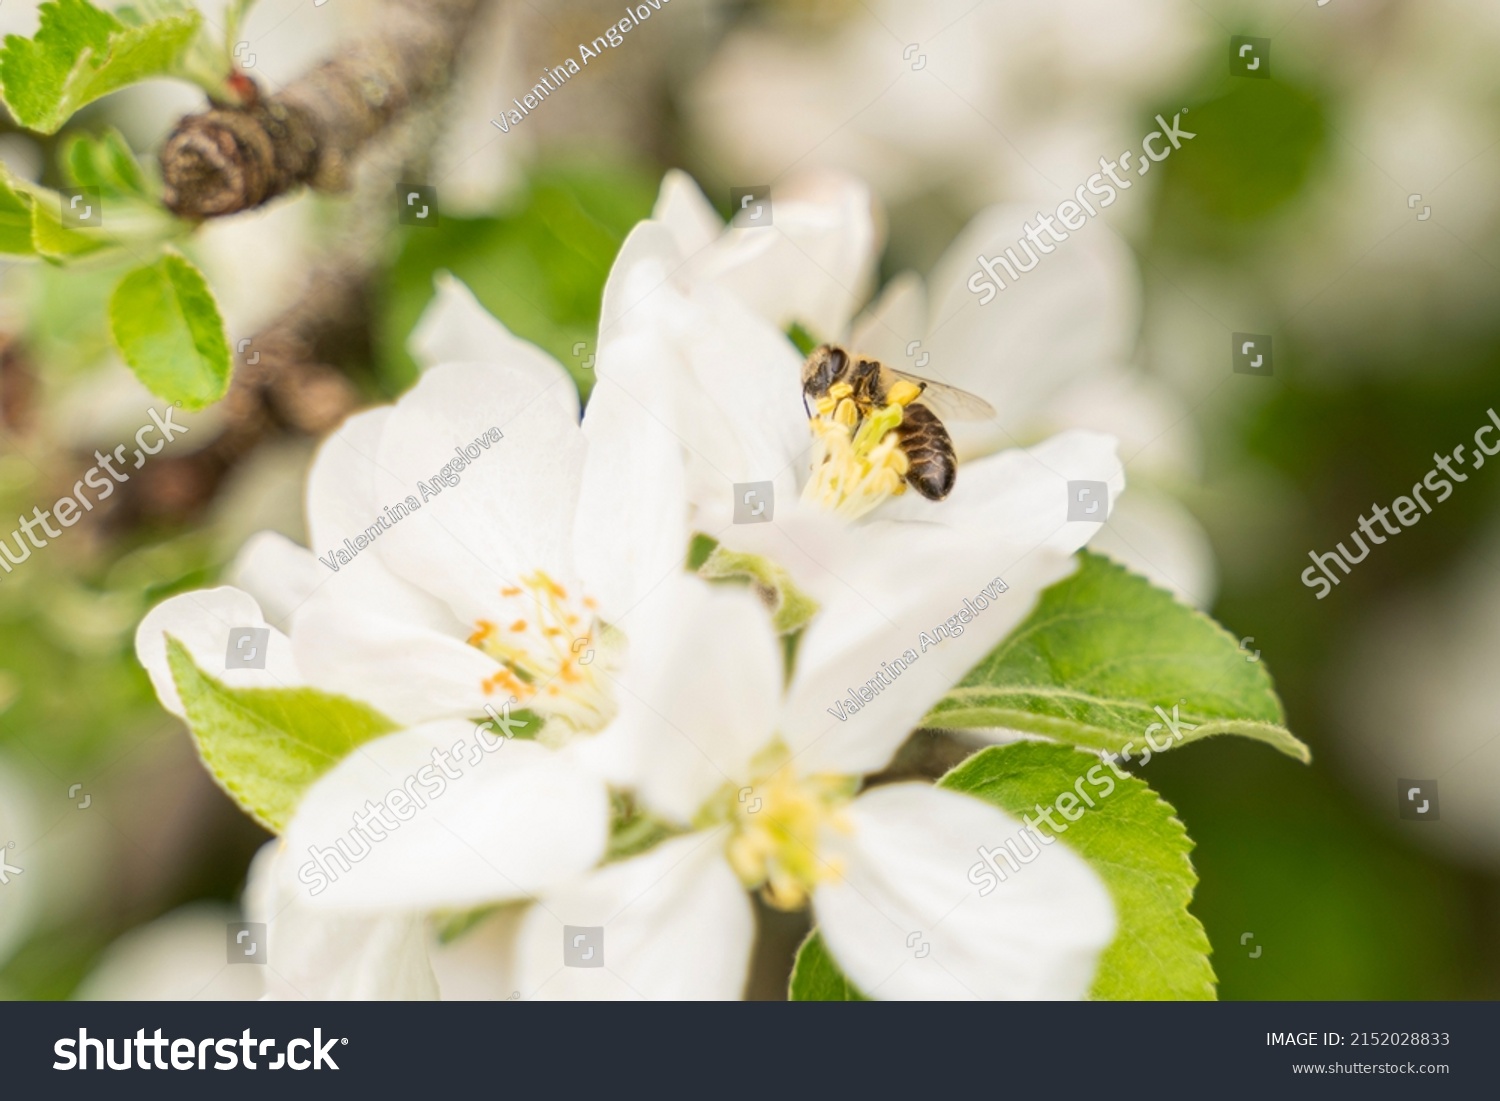 Flying Honey Bee Pollinating Apple Blossoms Stock Photo 2152028833 ...